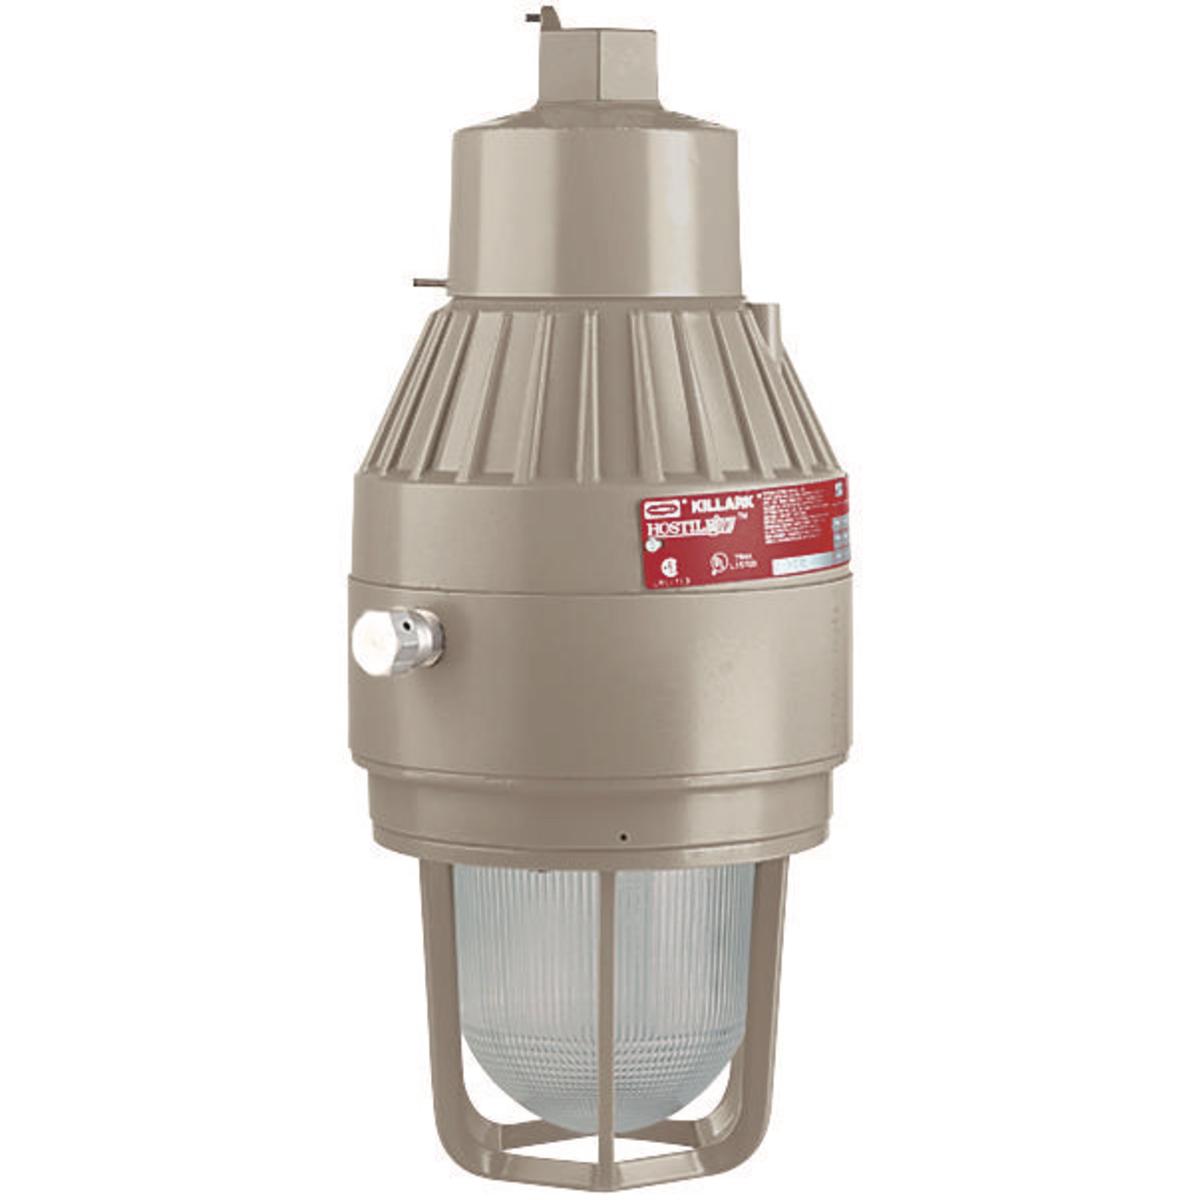 Hubbell EEQ2626E30A2GR EEQ Emergency CFL 26N26E 120/277V Red Pendant with Guard  ; Quad-Pin long-life triple-tube compact ; Fluorescent lamps included ; Choice of Pendant, Ceiling, Wall or Stanchion mount ; Factory Sealed - No external seal required ; Corrosion resistant-Copper